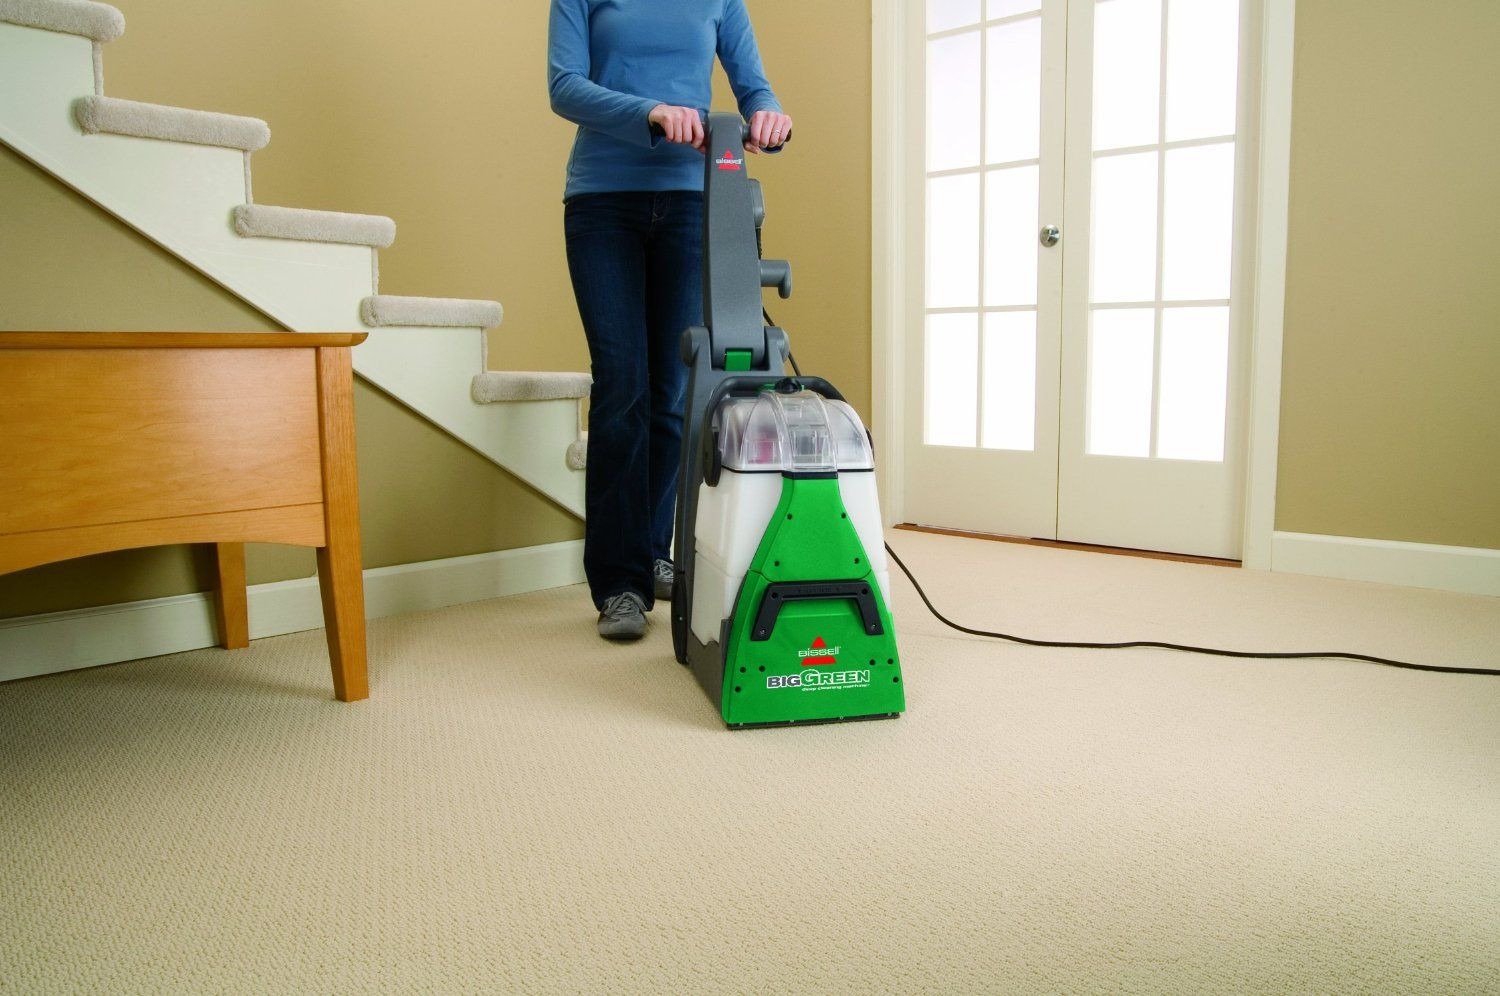 17 Lovable Bissell Hardwood Floor Expert Vacuum 2024 free download bissell hardwood floor expert vacuum of cleaning machine low section man cleaning hardwood floor vacuum in full size of cleaning machine bissell 86t386t3q big green deeping professional grad